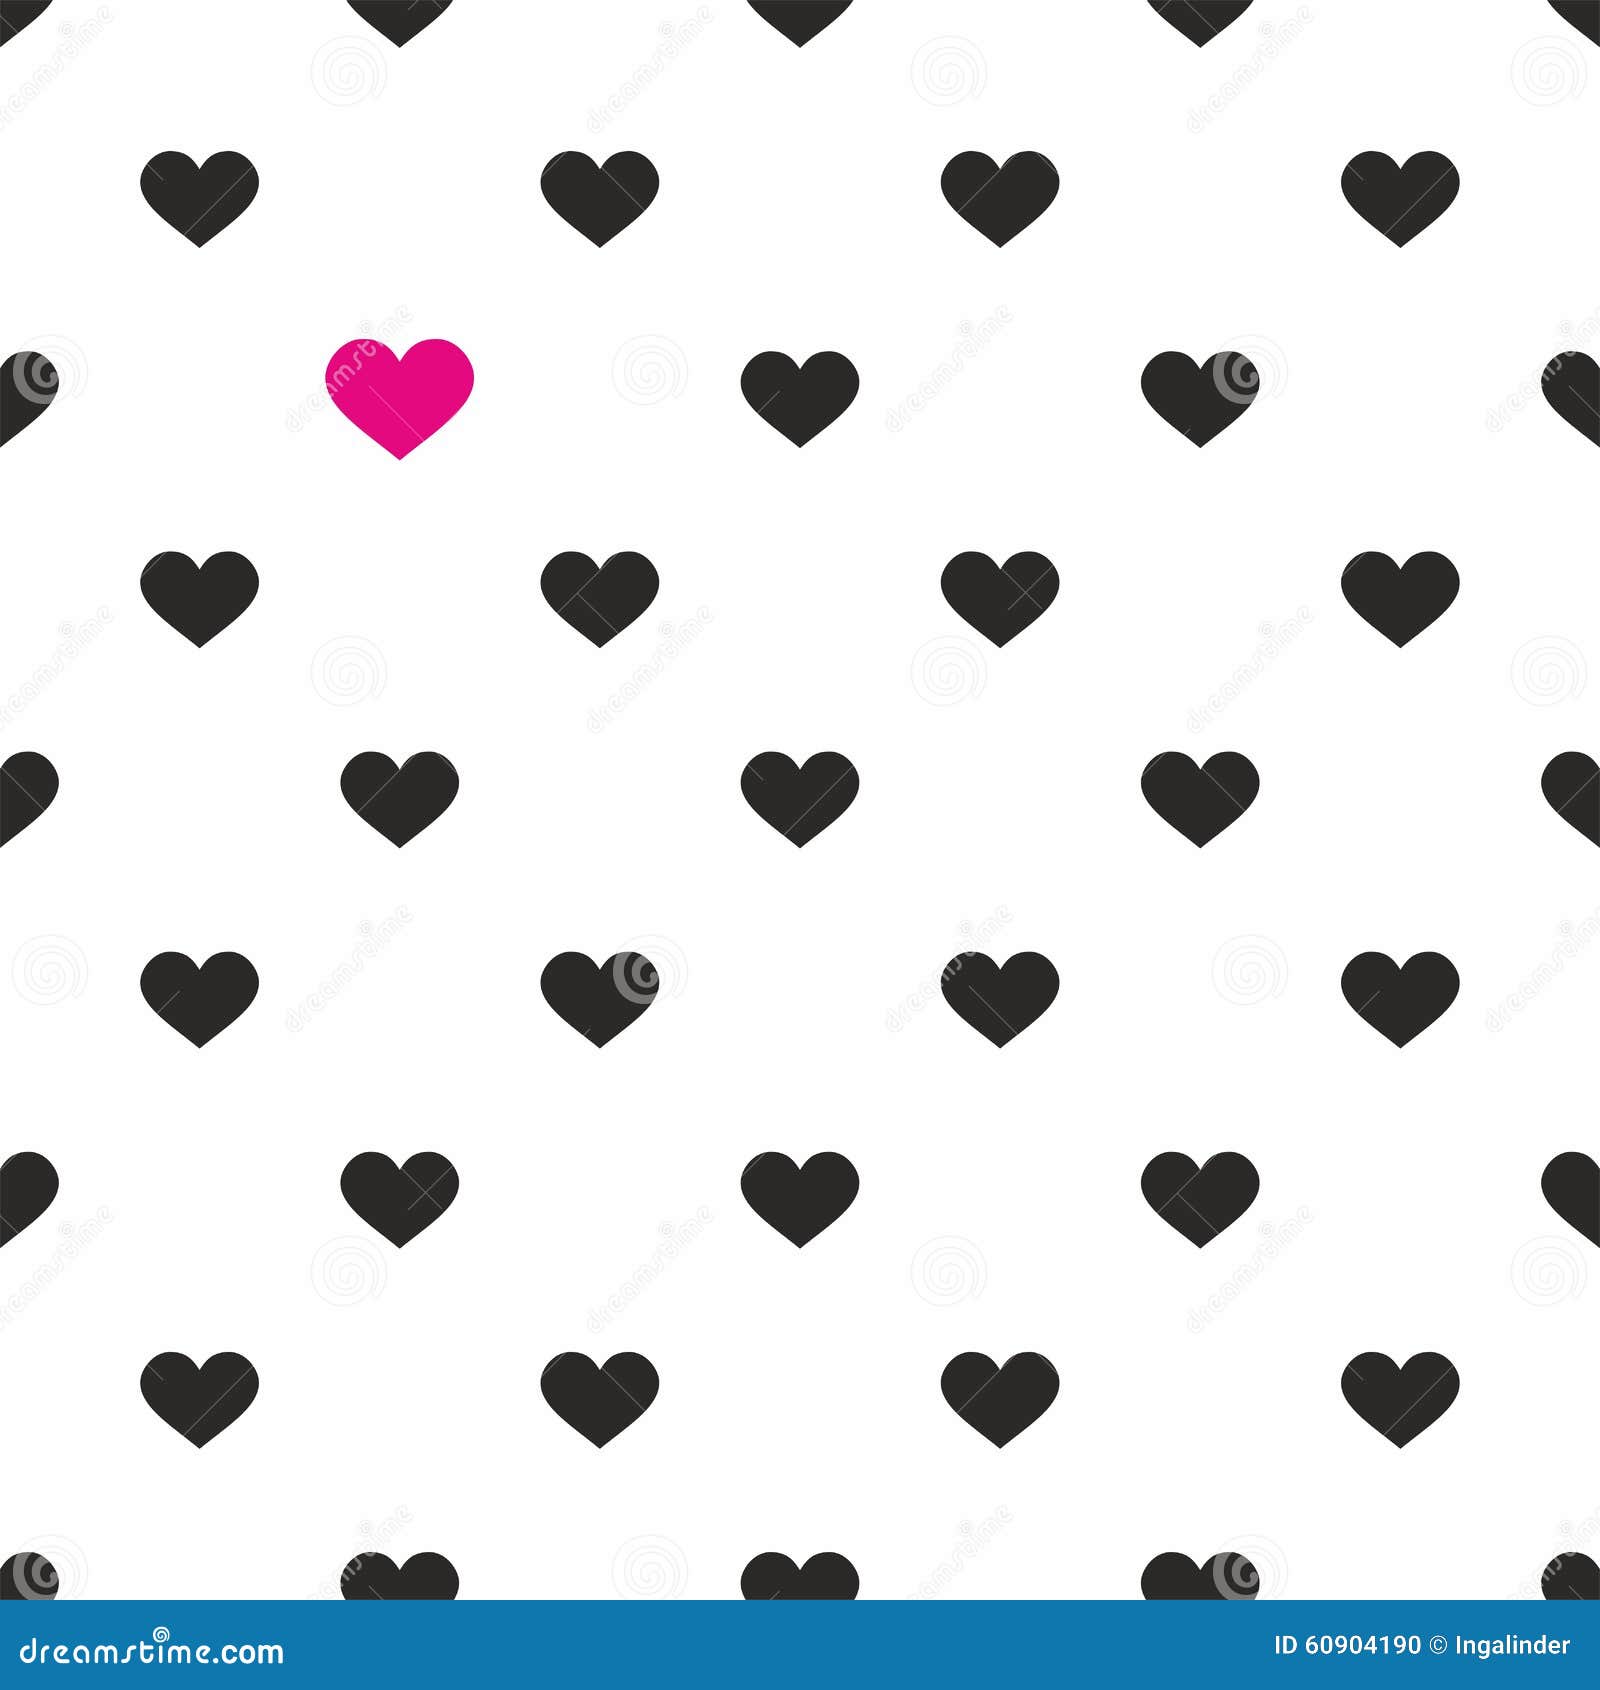 Tile Vector Pattern With Pink And Black Hearts On White